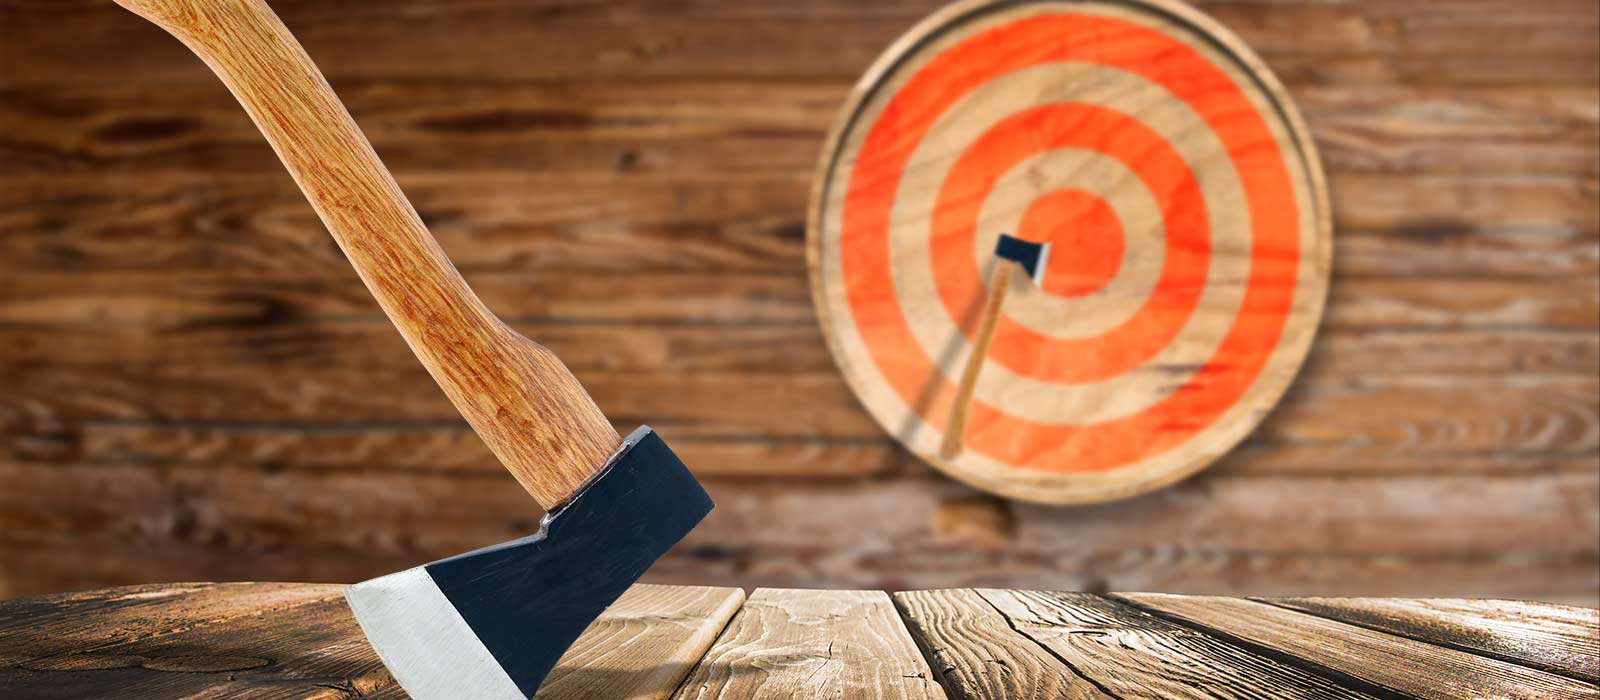 Urban Axe Throwing Founder Interviewed by 614 Startups